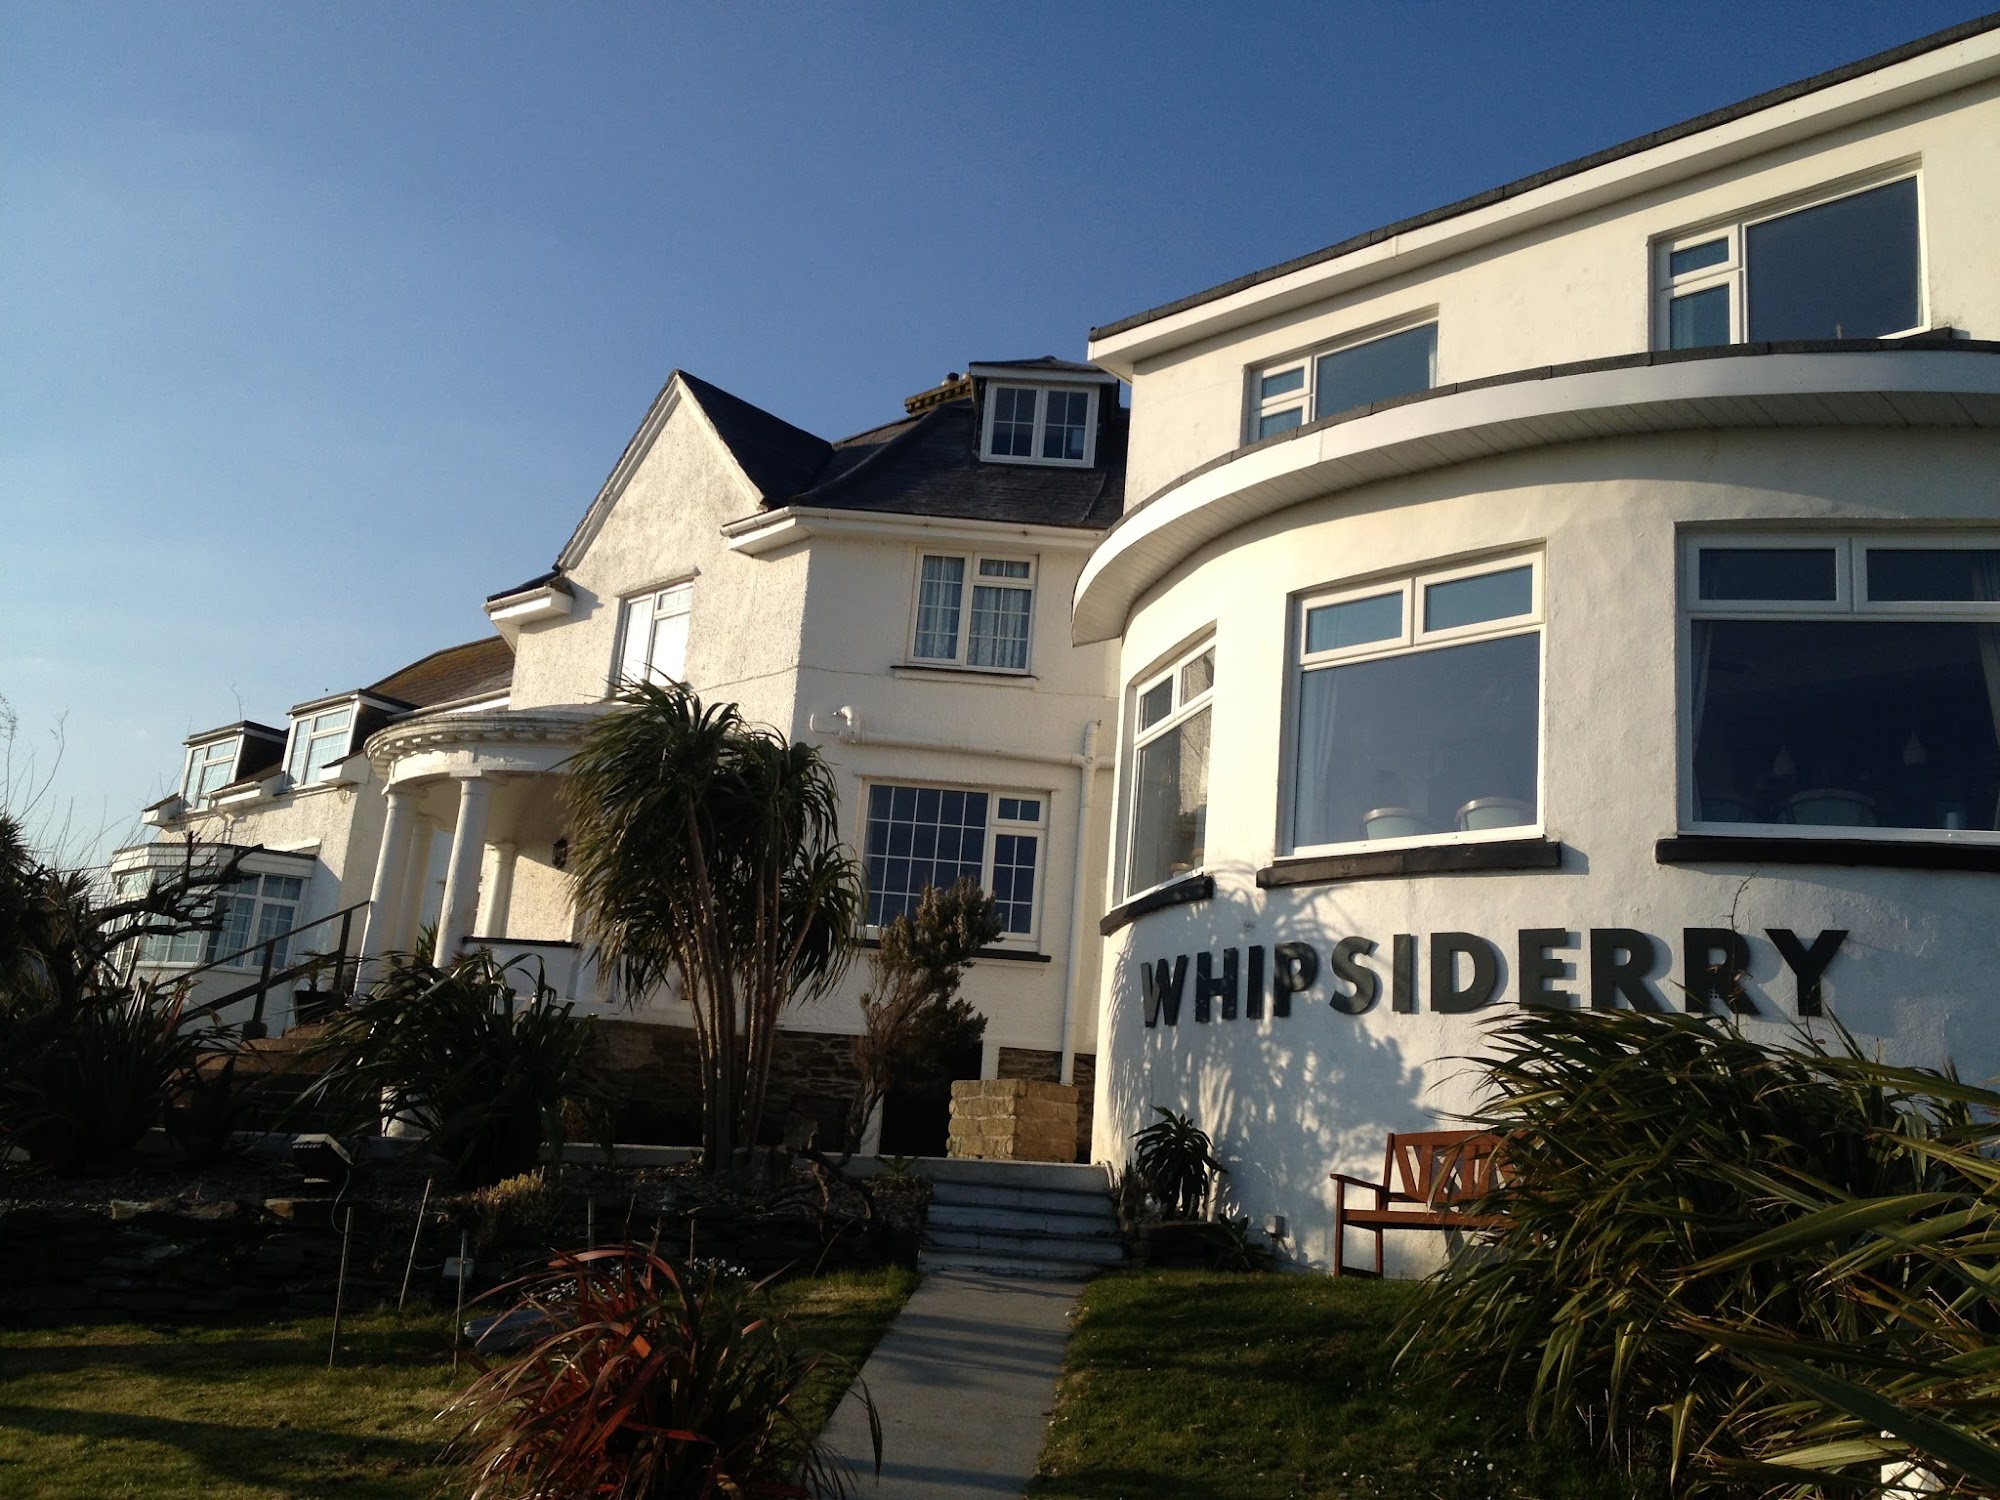 Whipsiderry Hotel. Newquay Cornwall